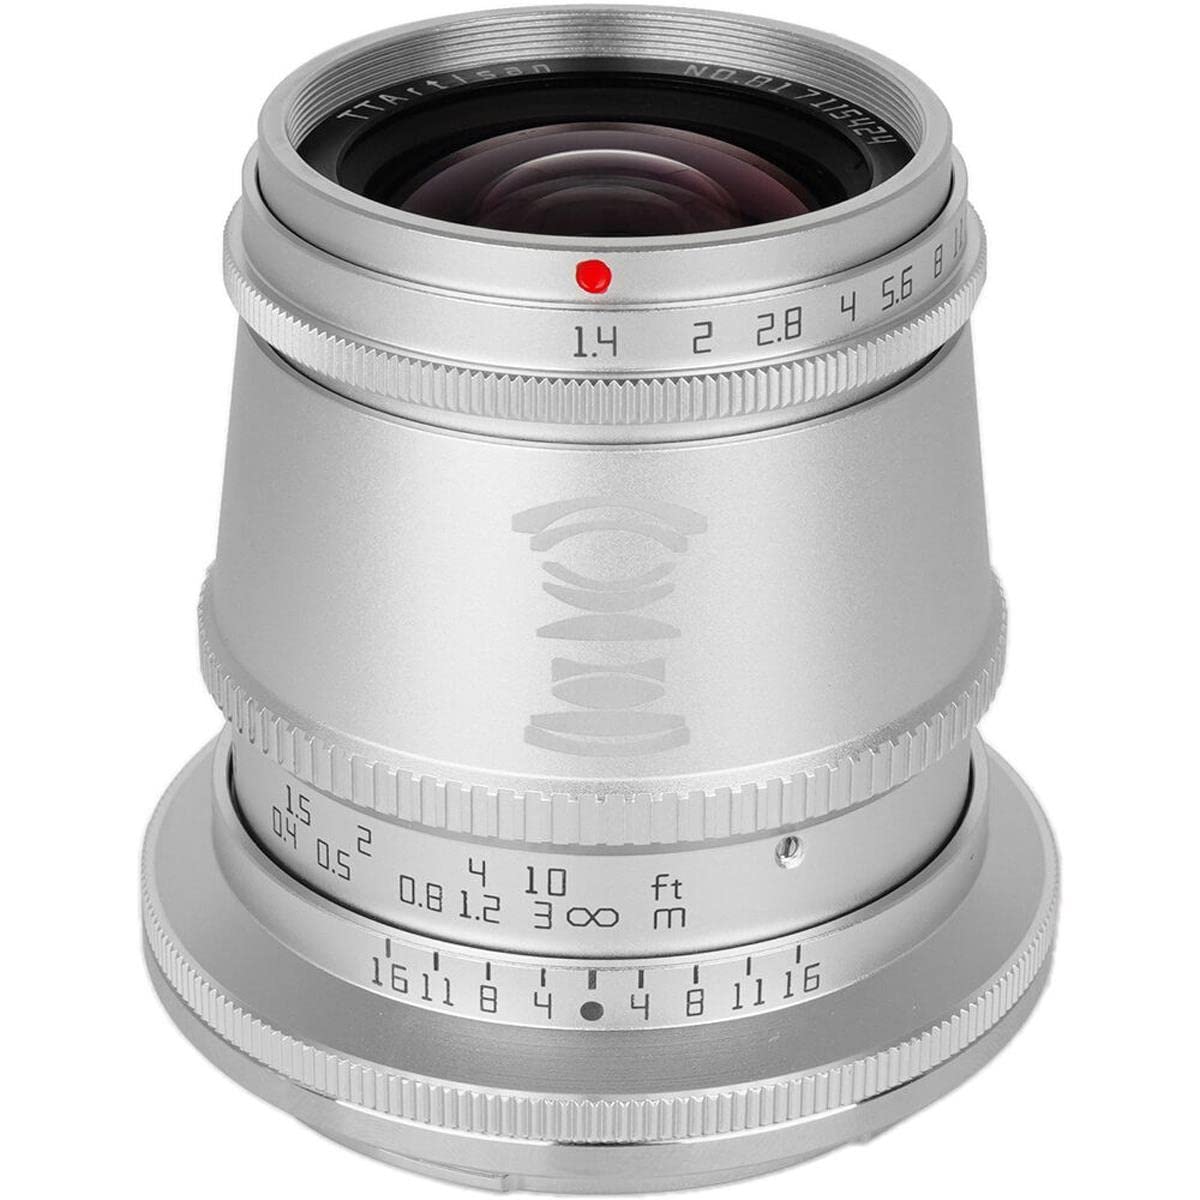 TT Artisan 17 mm f 1.4 APS-C Lens Connection Nikon Z Mount Silver Wide Angle Lens with Manual Focus 送料無料